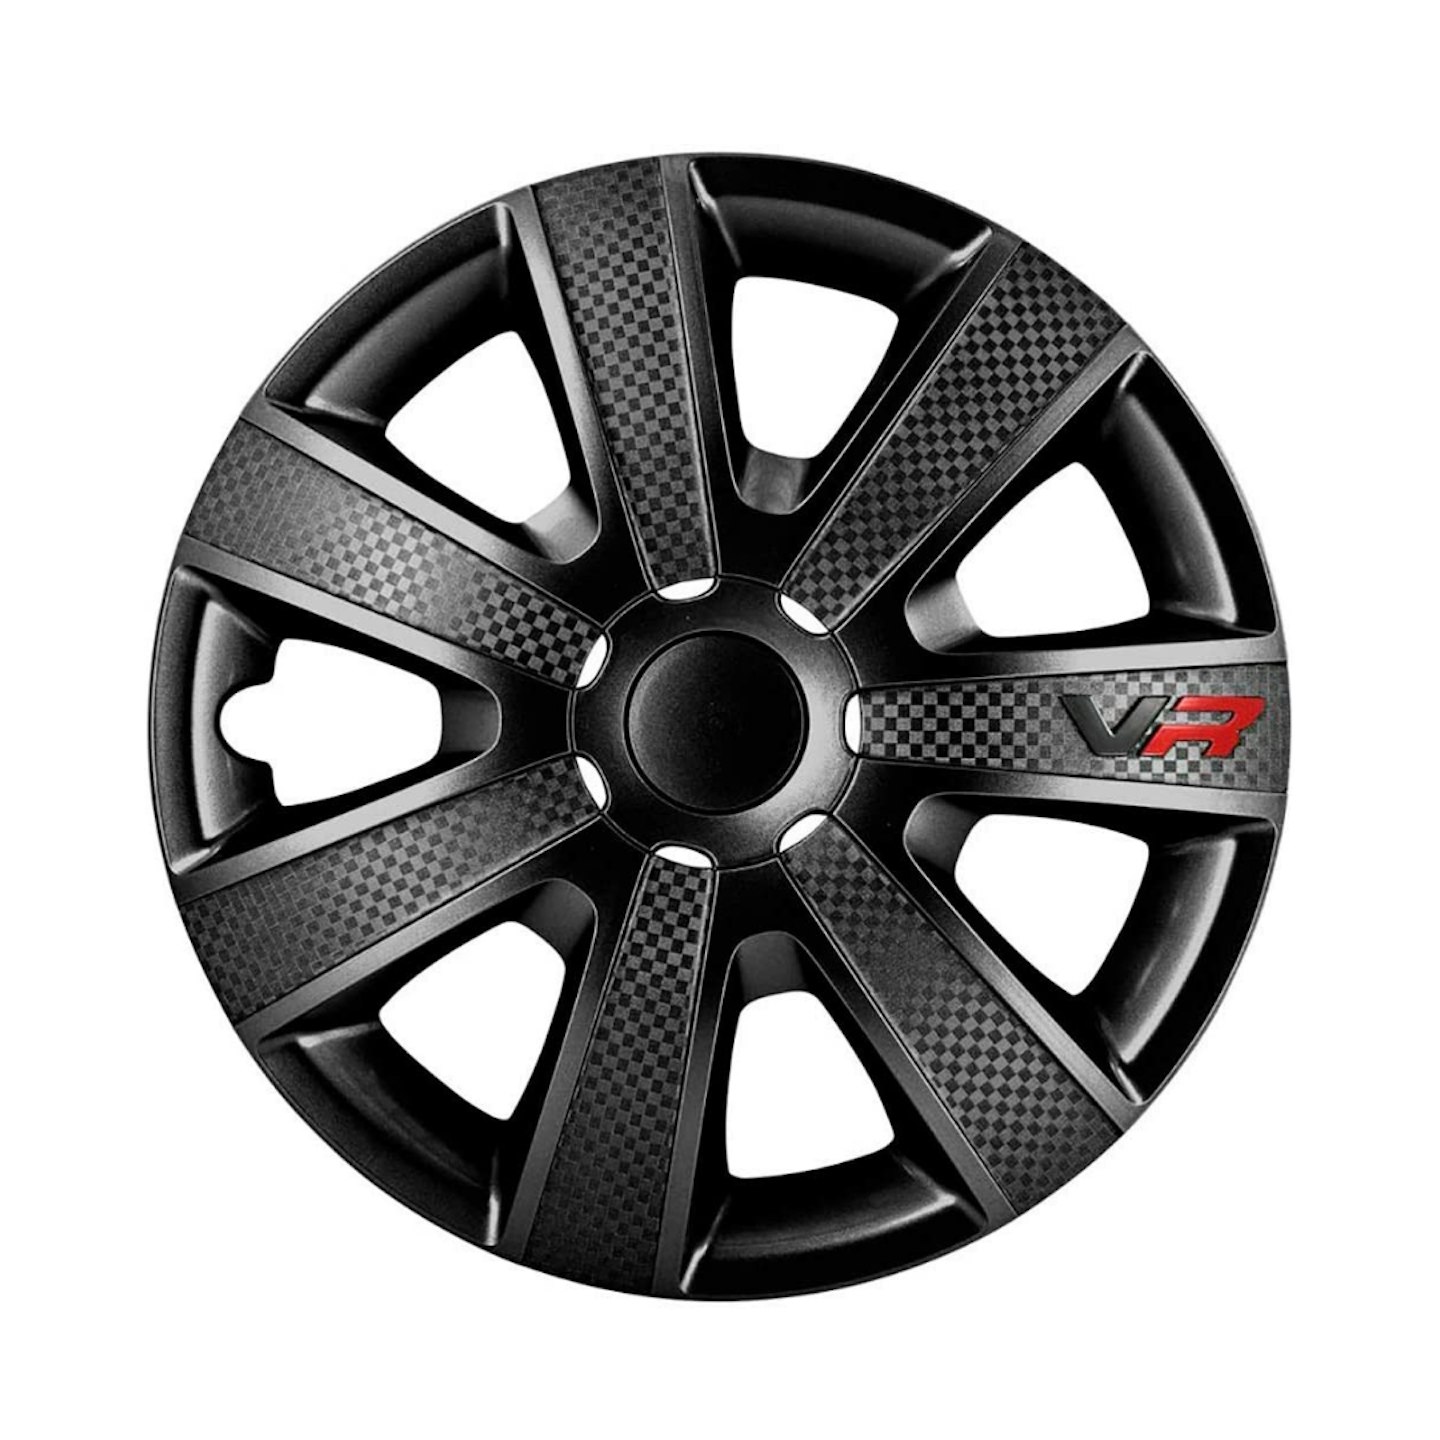 Autostyle VR 16-inch Wheel Covers